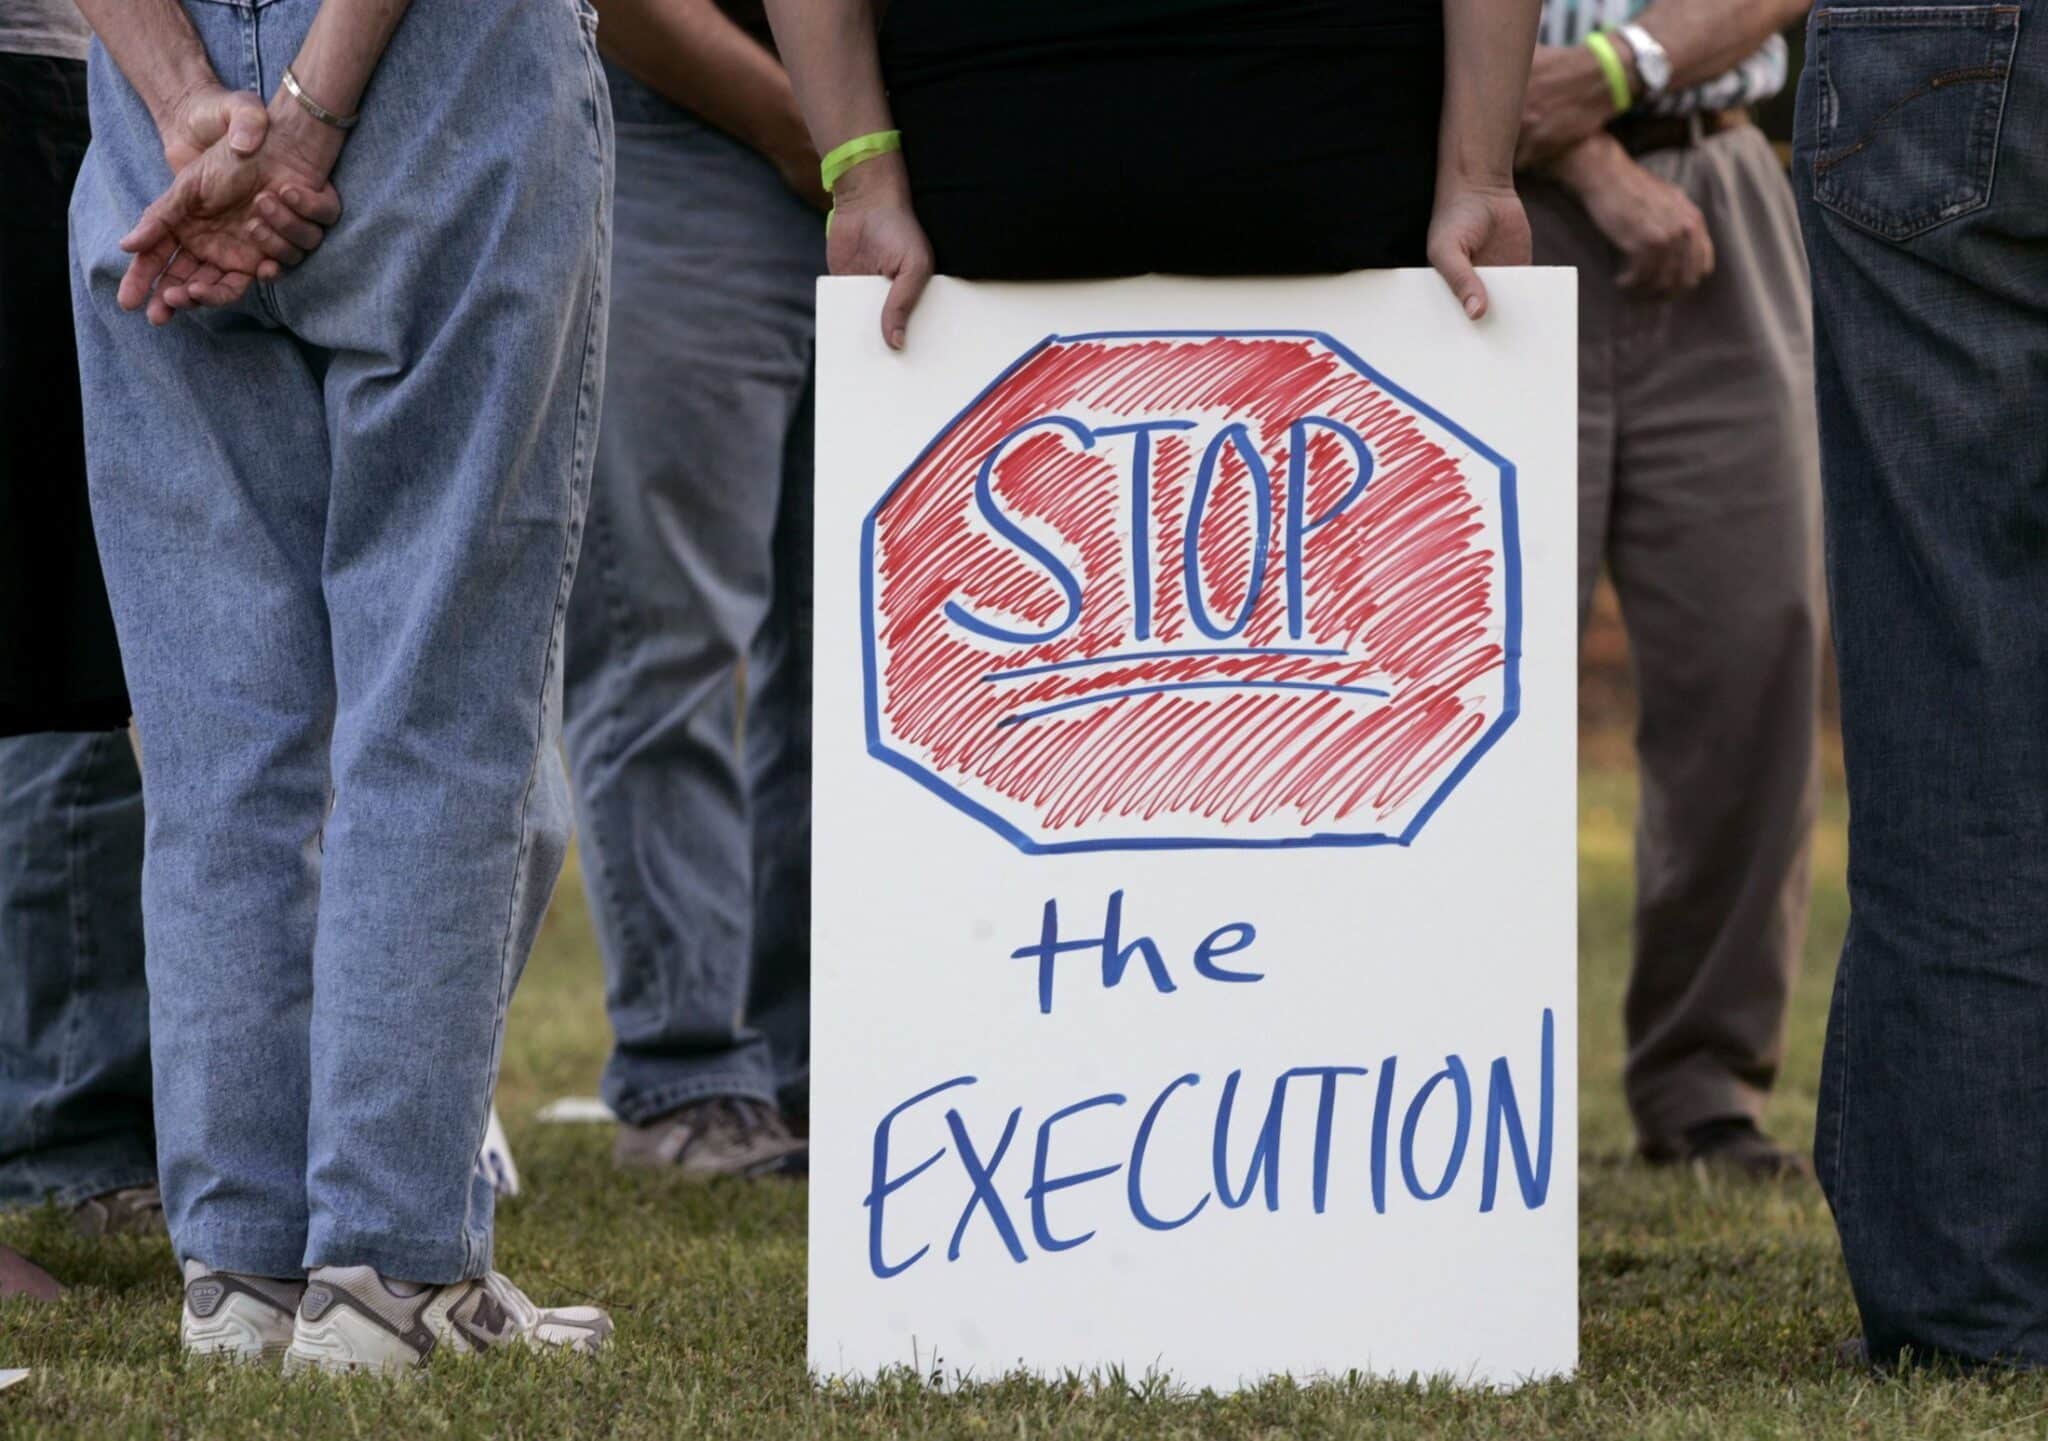 Protesters opposed to the death penalty demonstrate outside a Georgia state prison for men in Jackson in this 2008 file photo. Called the Georgia Diagnostic and Classification Prison, it holds the state's execution chamber. (OSV News photo/Tami Chappell, Reuters)